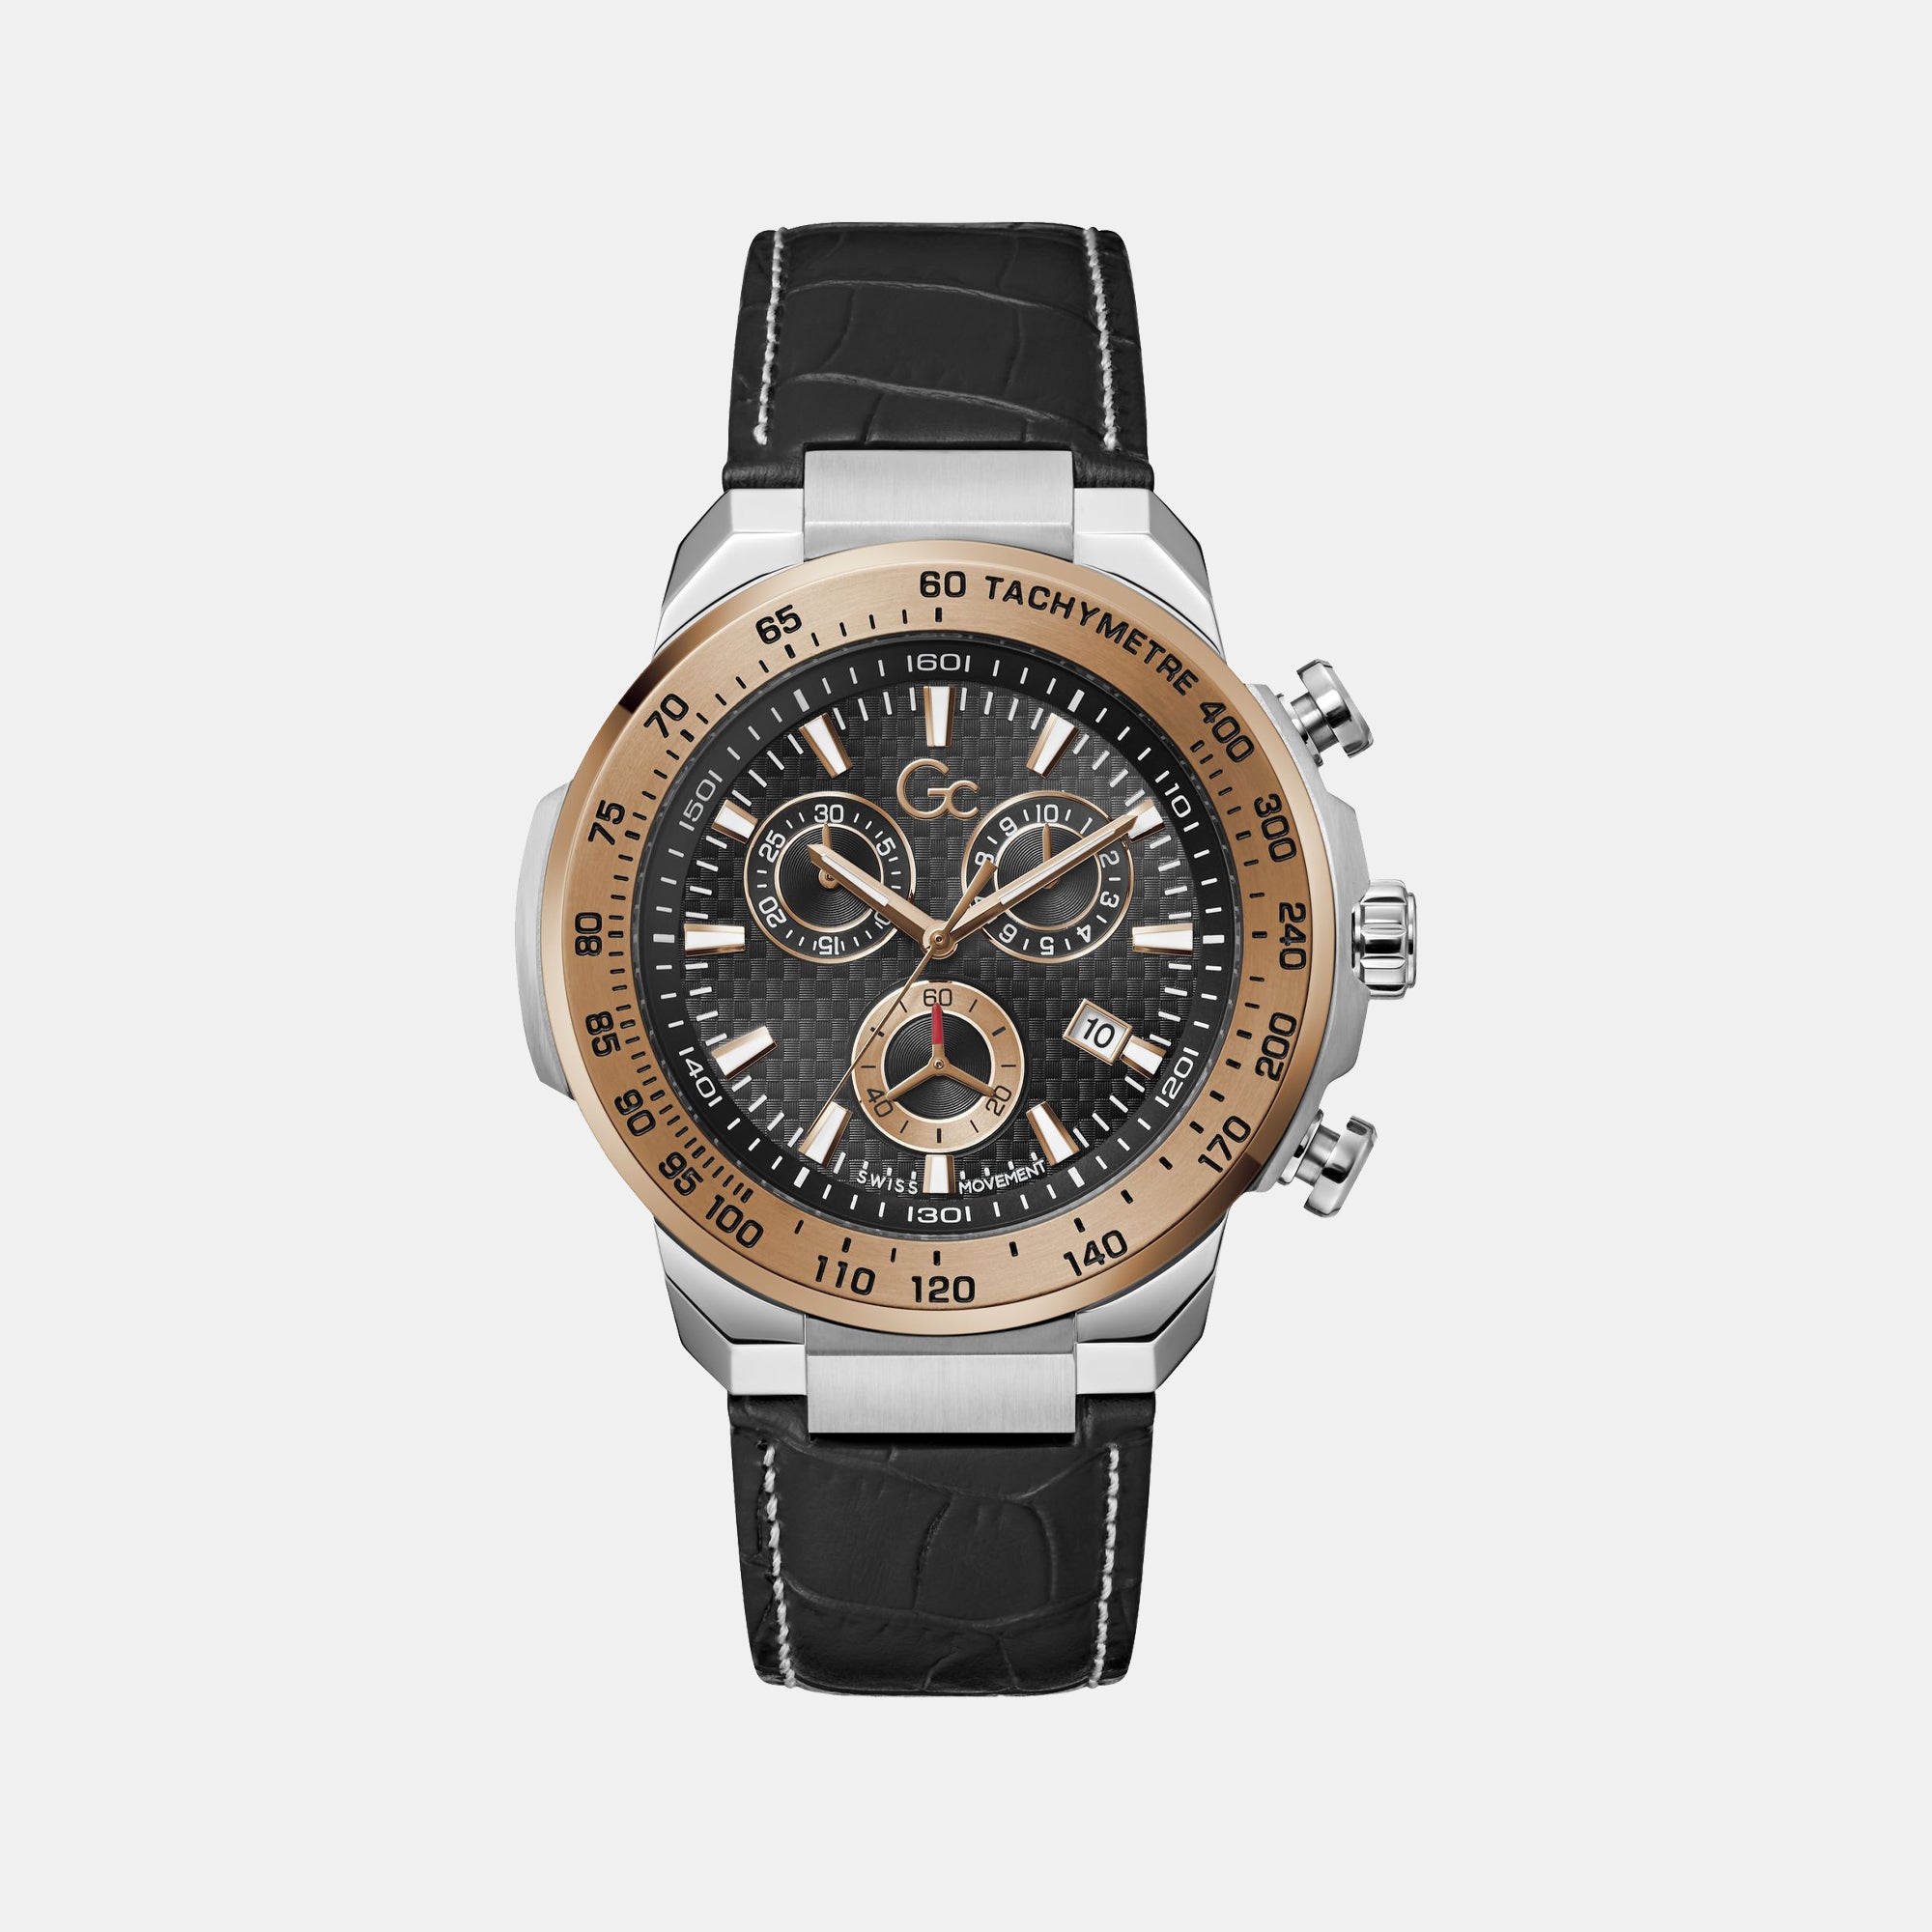 Is the Collection Romanson watch a luxurious brand? - Quora